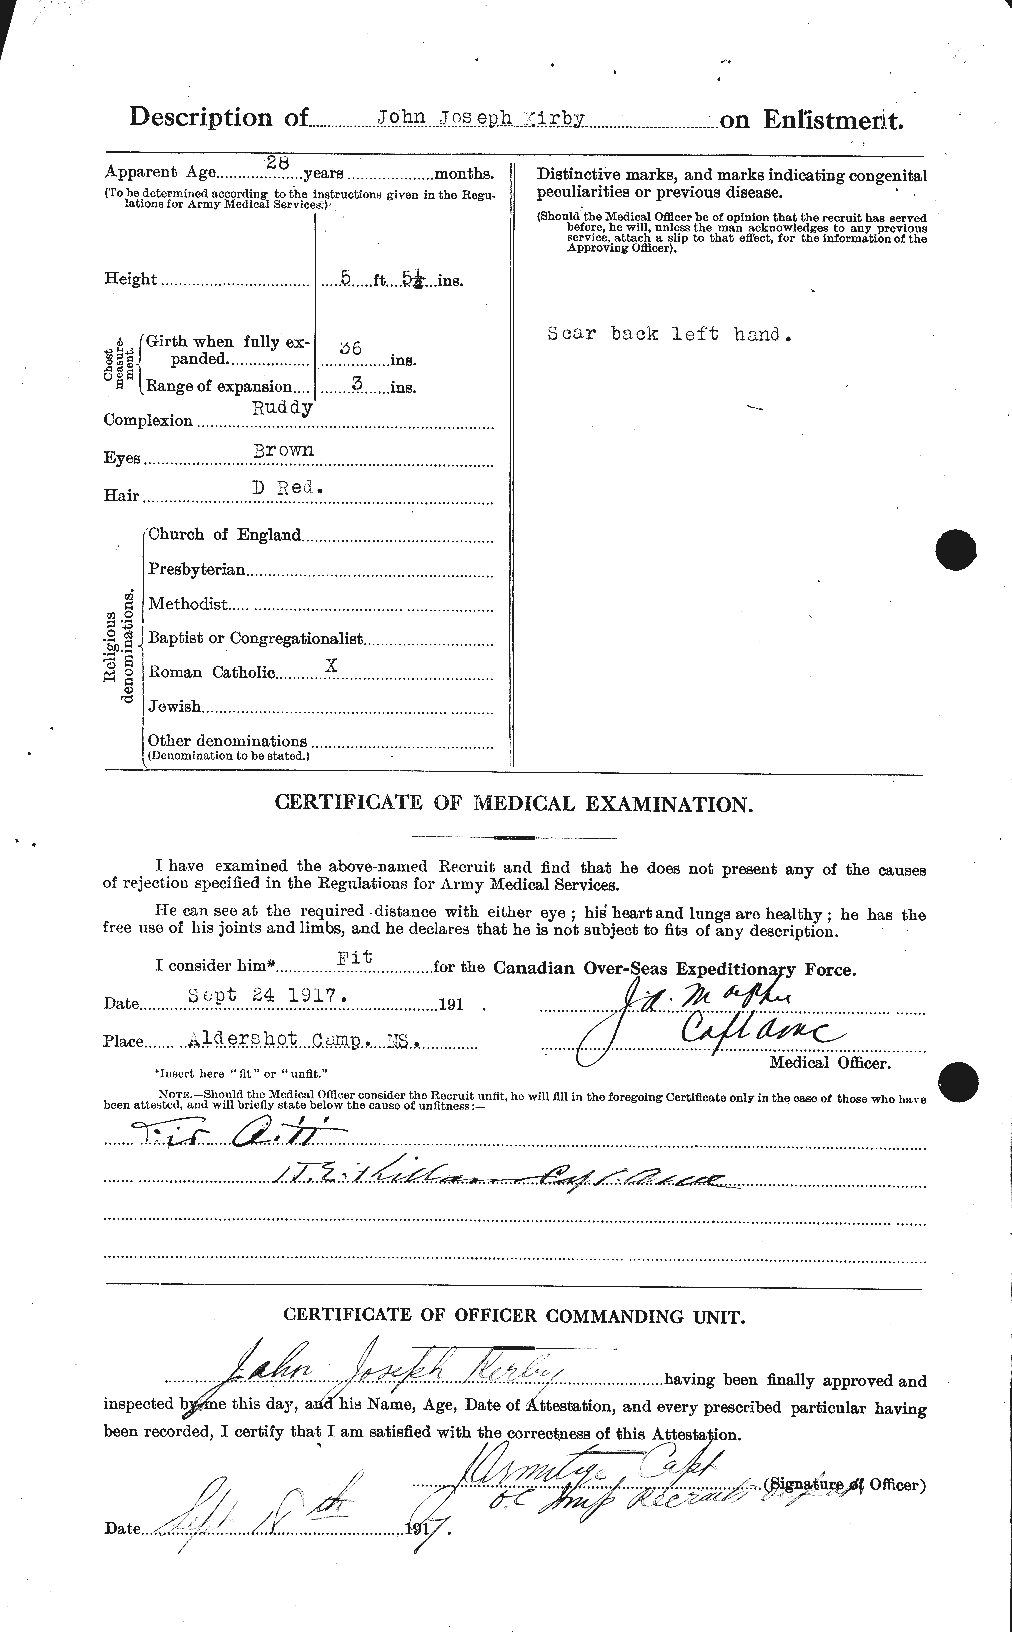 Personnel Records of the First World War - CEF 437235b